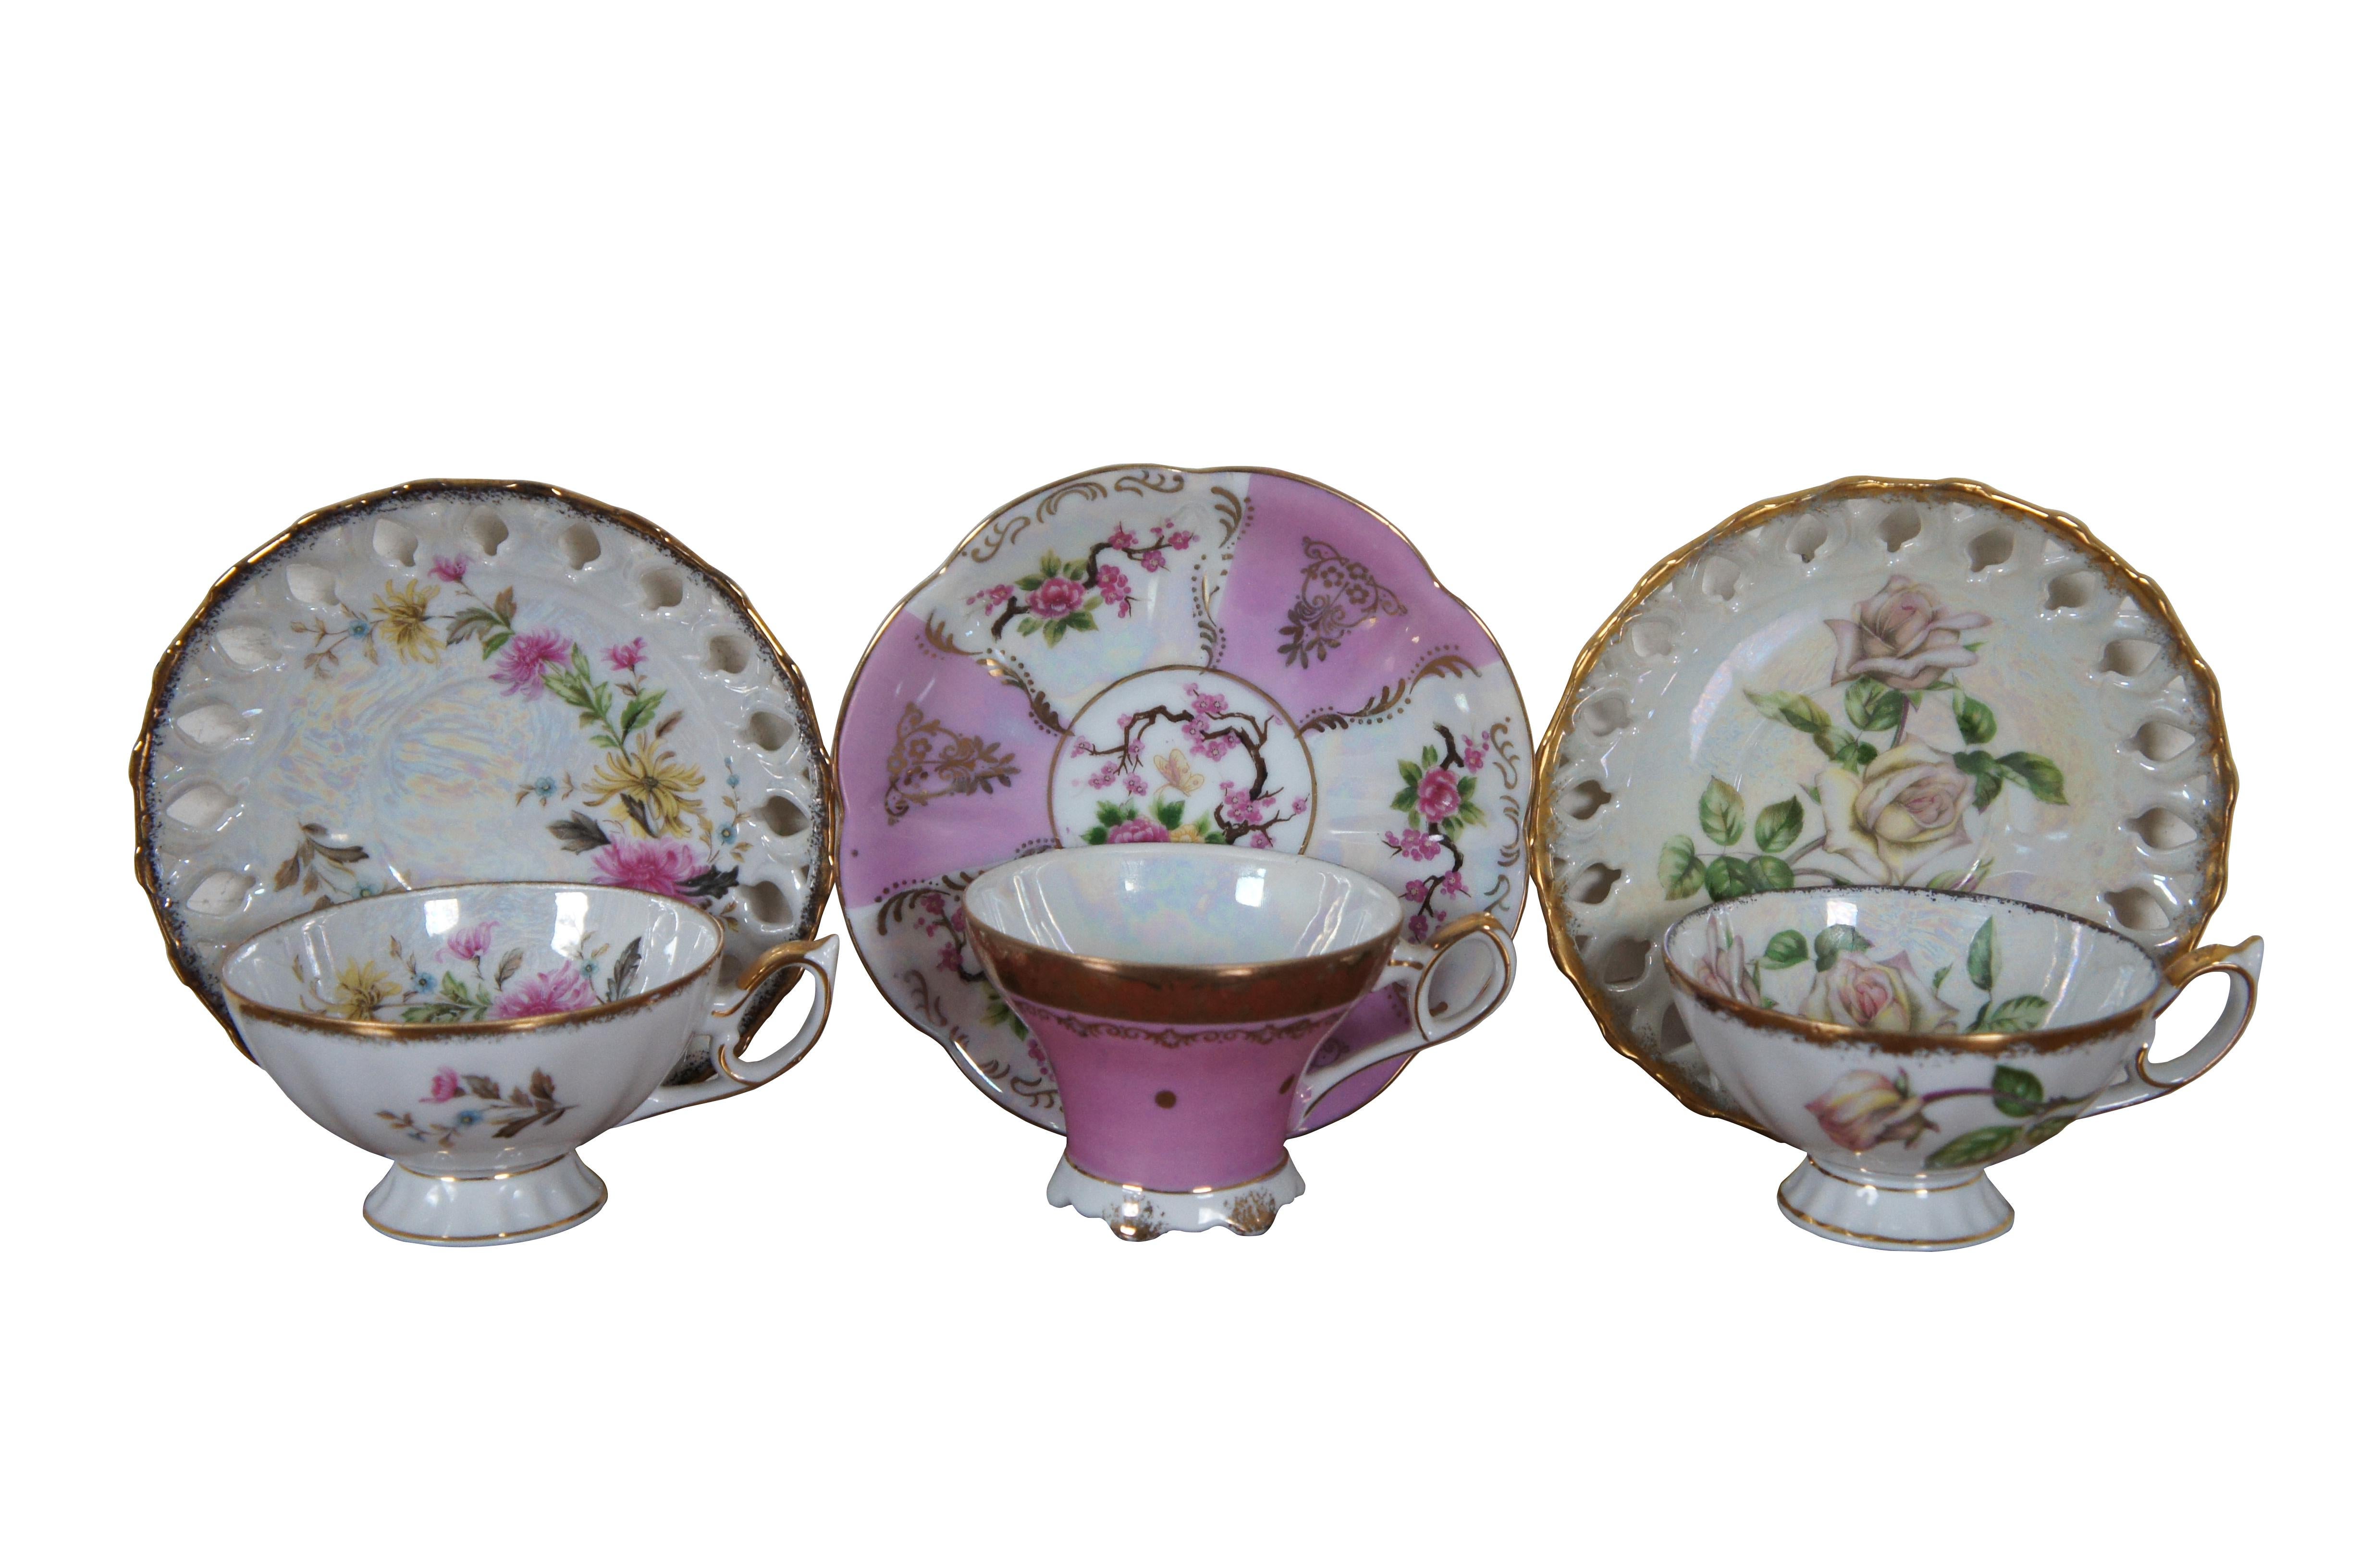 Napco Ceramic (stamped C-5316), Wales, 2 by Cherry China, 2 by Nippon Yoko Boeki Co, Norcrest Fine China (Birthday Cup - November - Topaz - C-133), one unknown maker with mark shaped like wings, Lipper & Mann Creations (Royal Halsey – Very